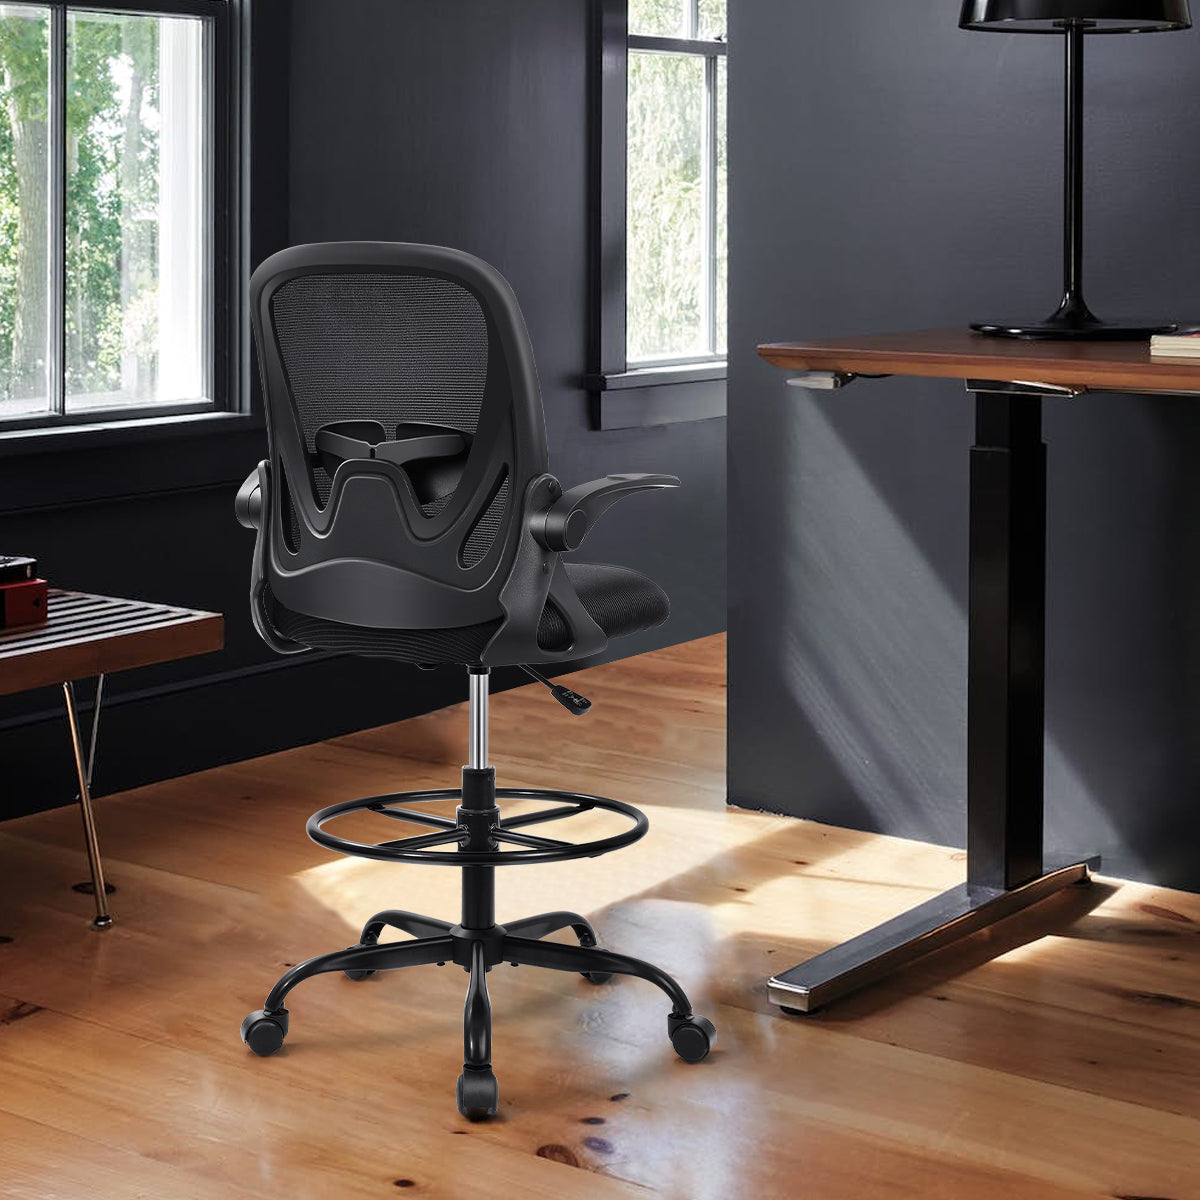 Drafting Chair - Tall Office Chair for Adjustable Standing Desks